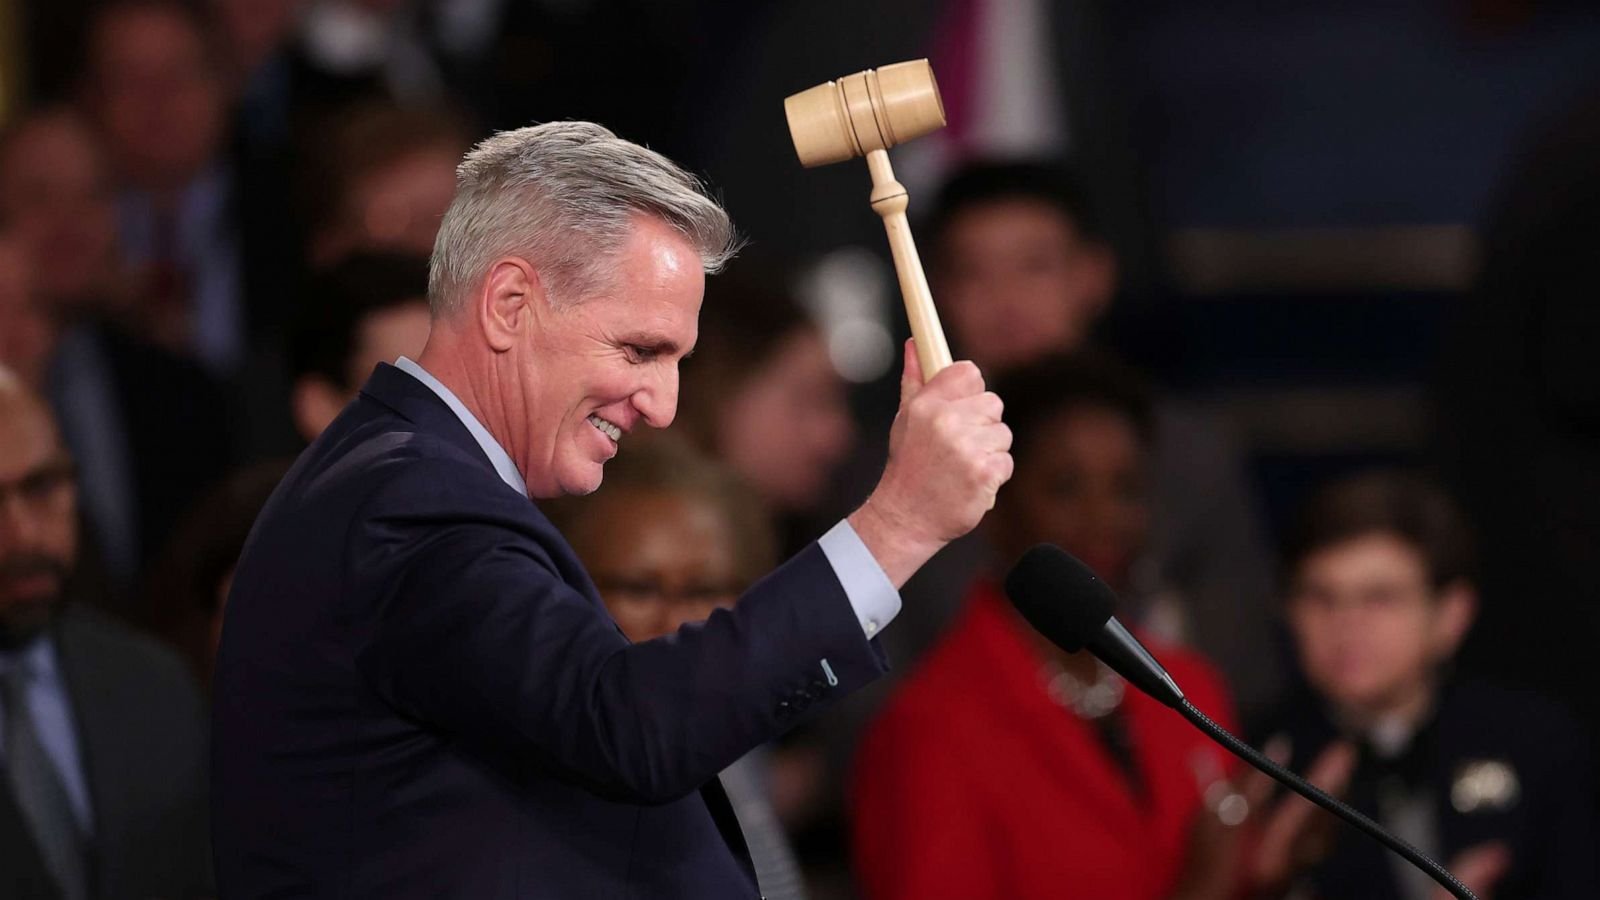 New Congress live updates: McCarthy finally wins speakership, ending gridlock in the House